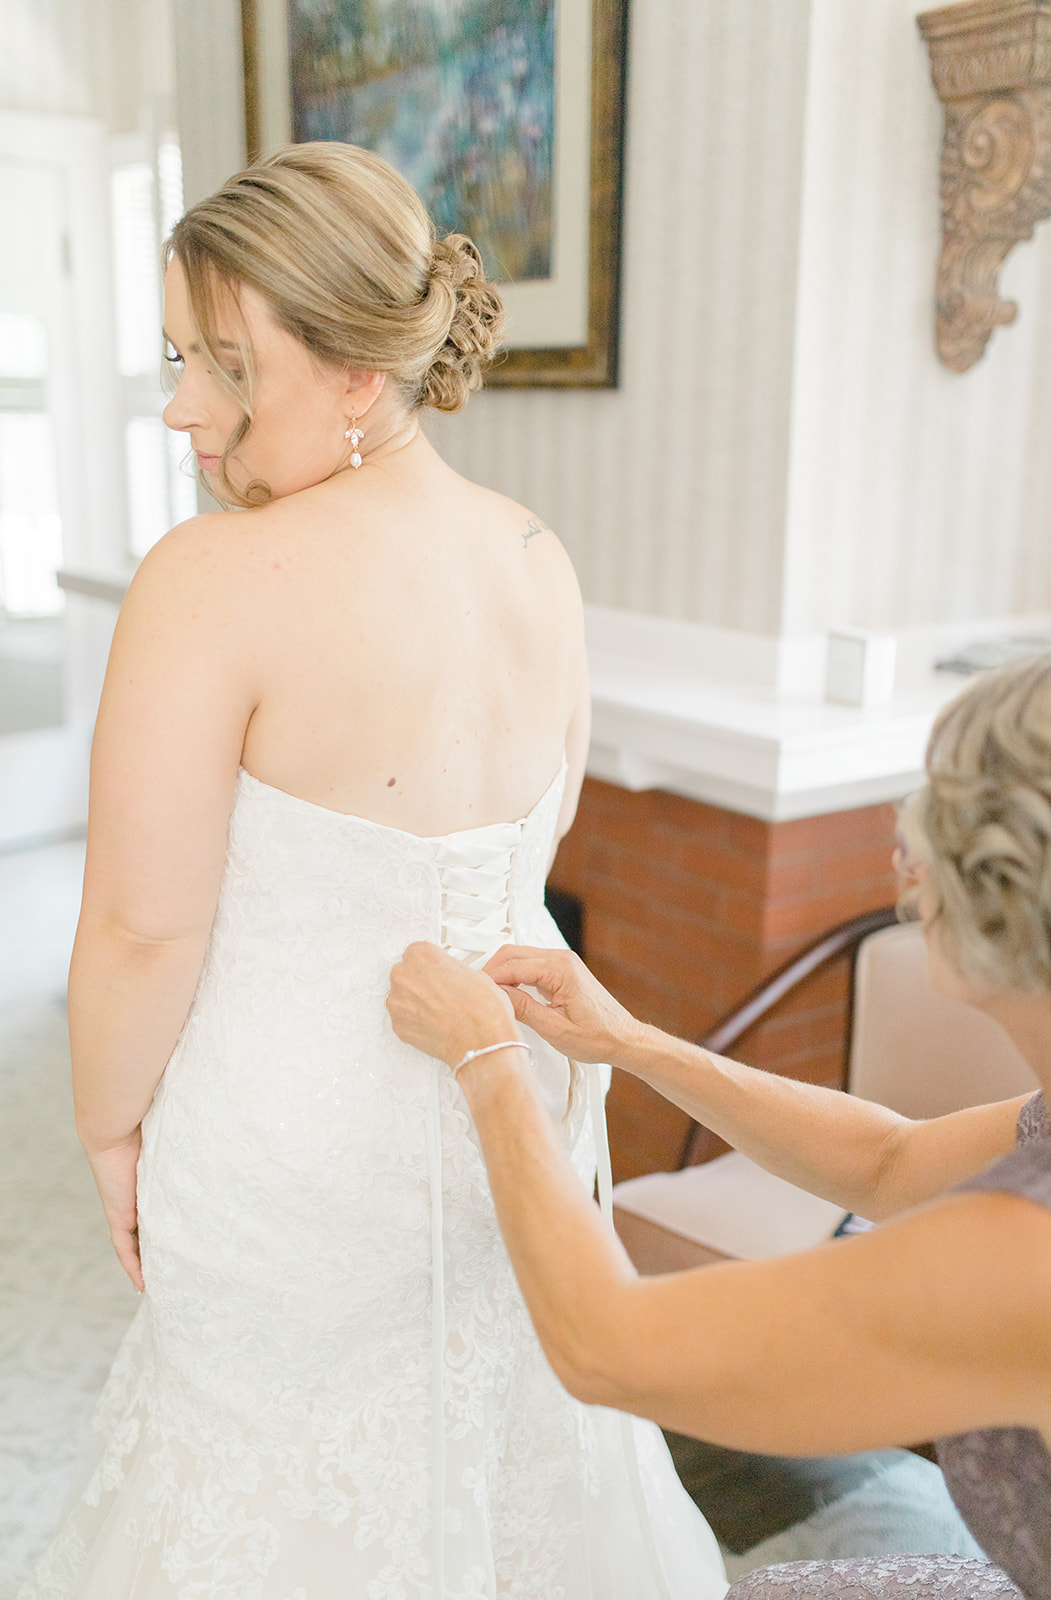 Bride getting ready for wedding day, lacing up bridal gown